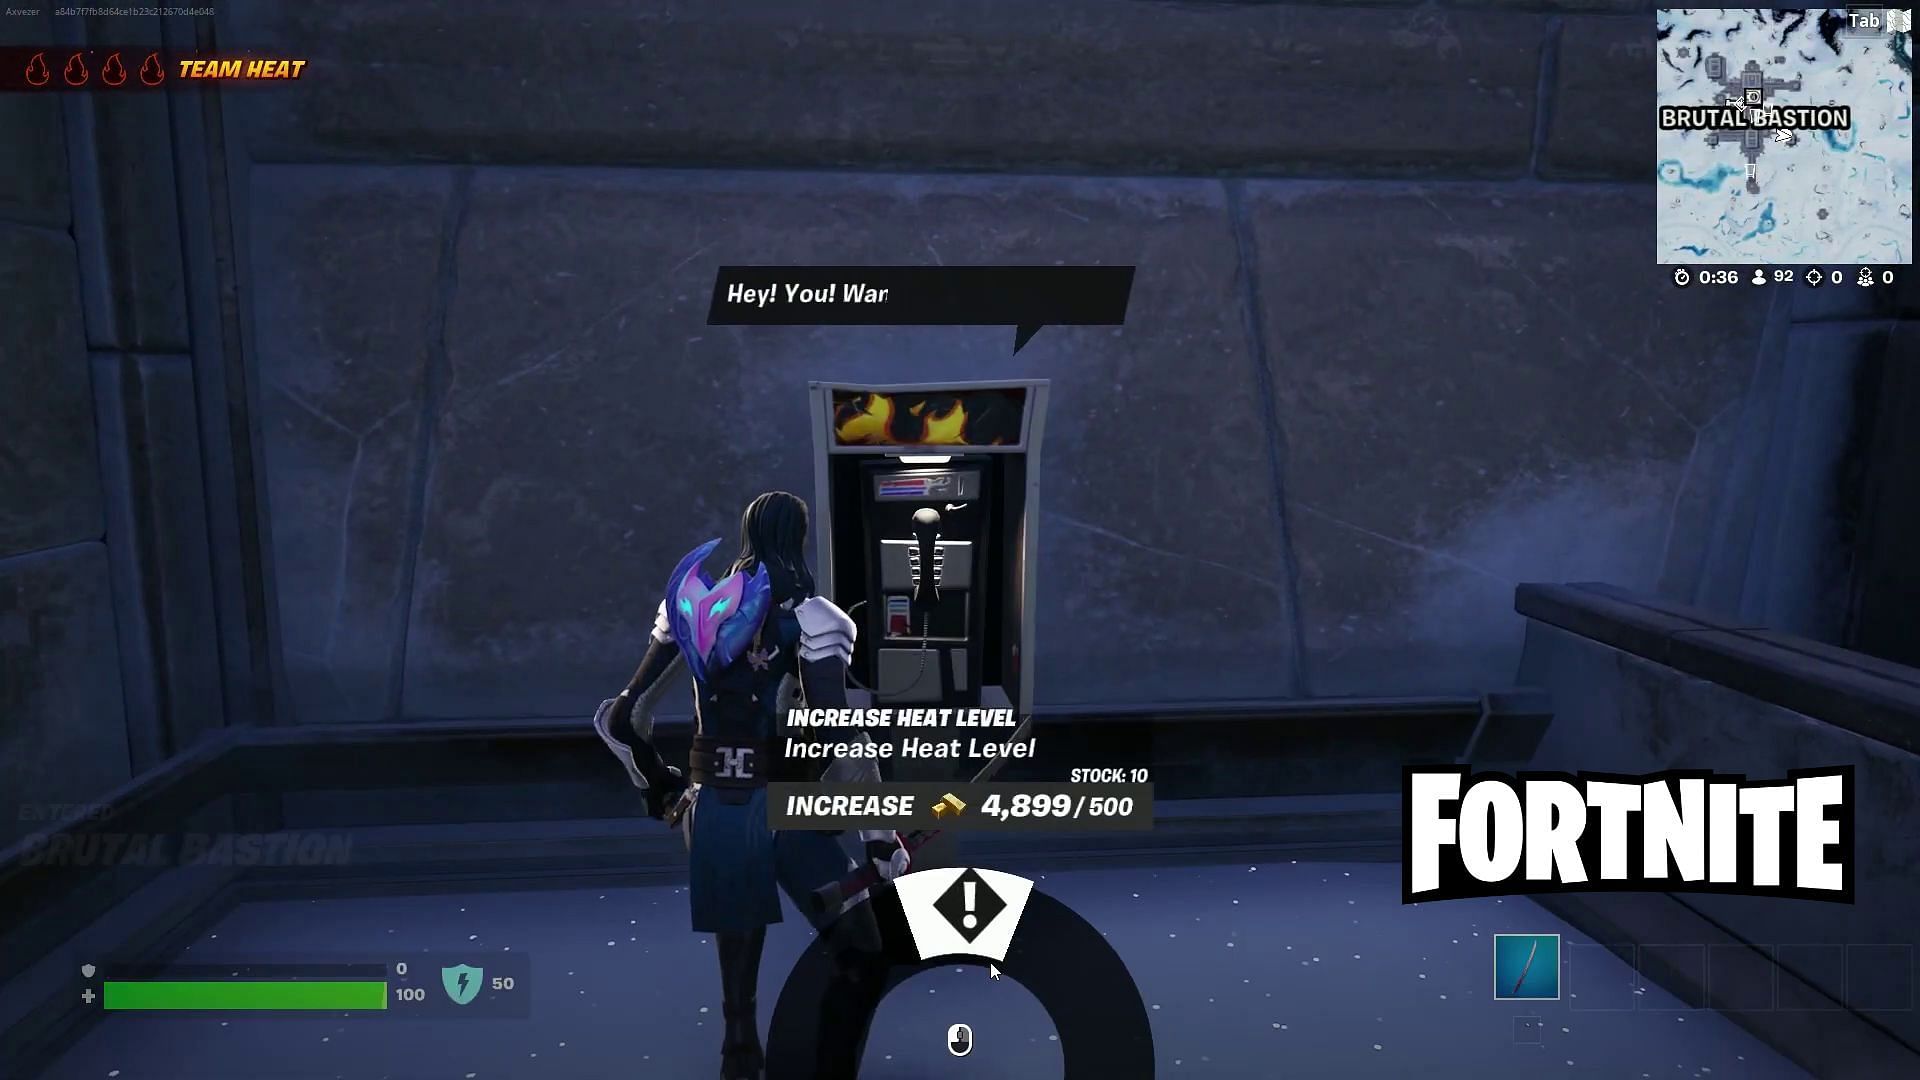 Players can also raise heat level using a Burner Payphone (Image via YouTube/Axvezer)